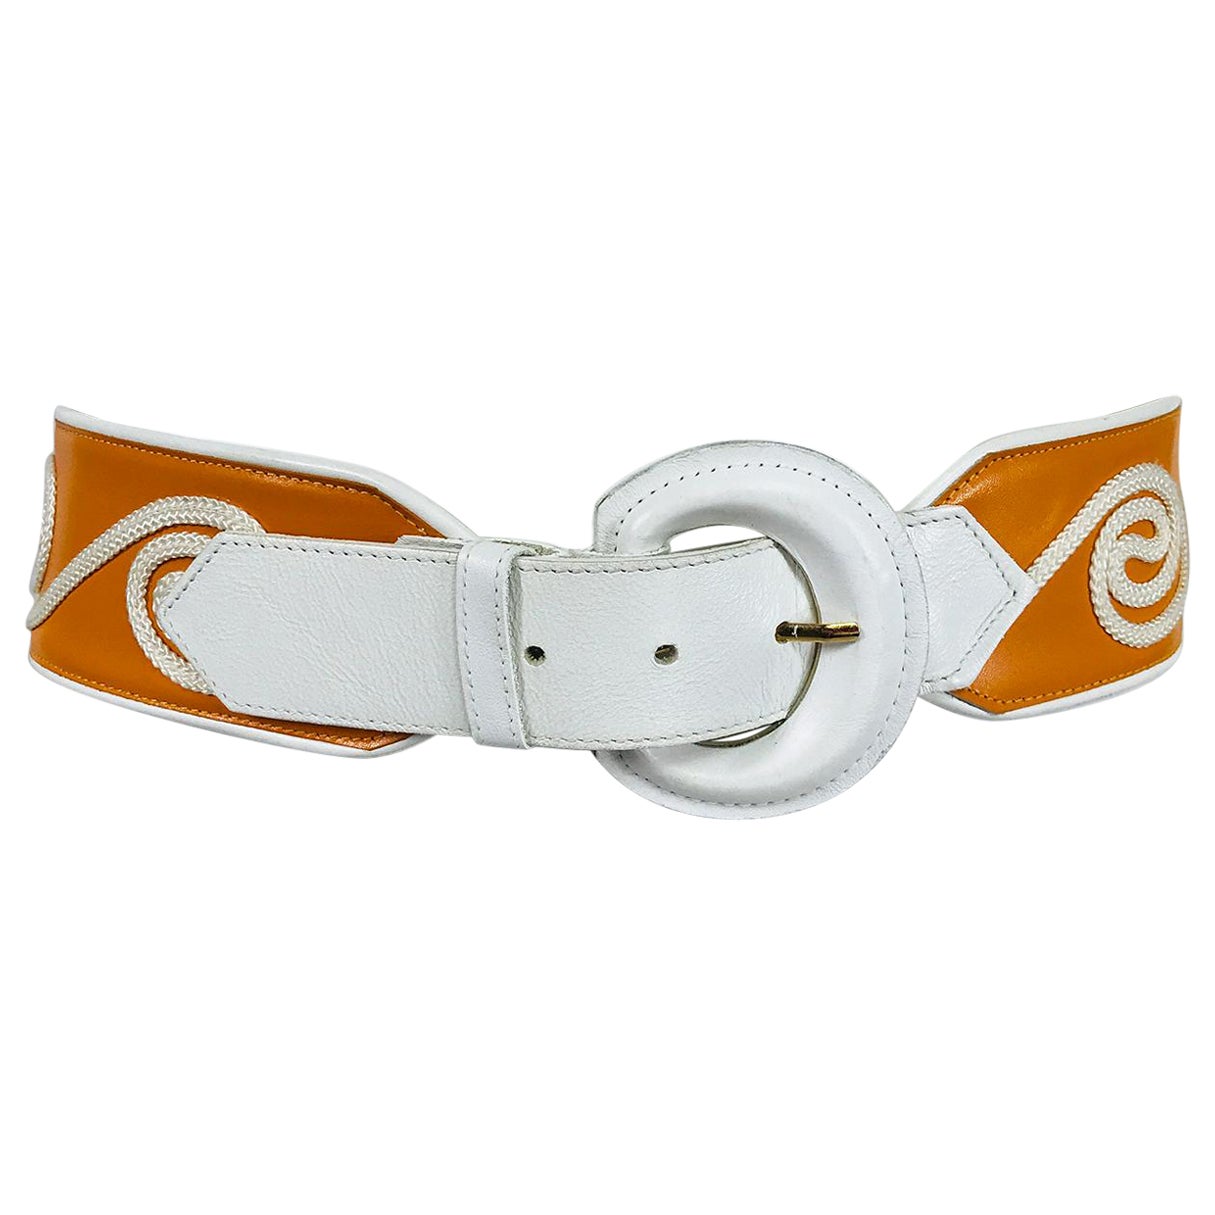  Christian Dior White & Golden Yellow Cord Applique Wide Leather Belt M-L 1990s